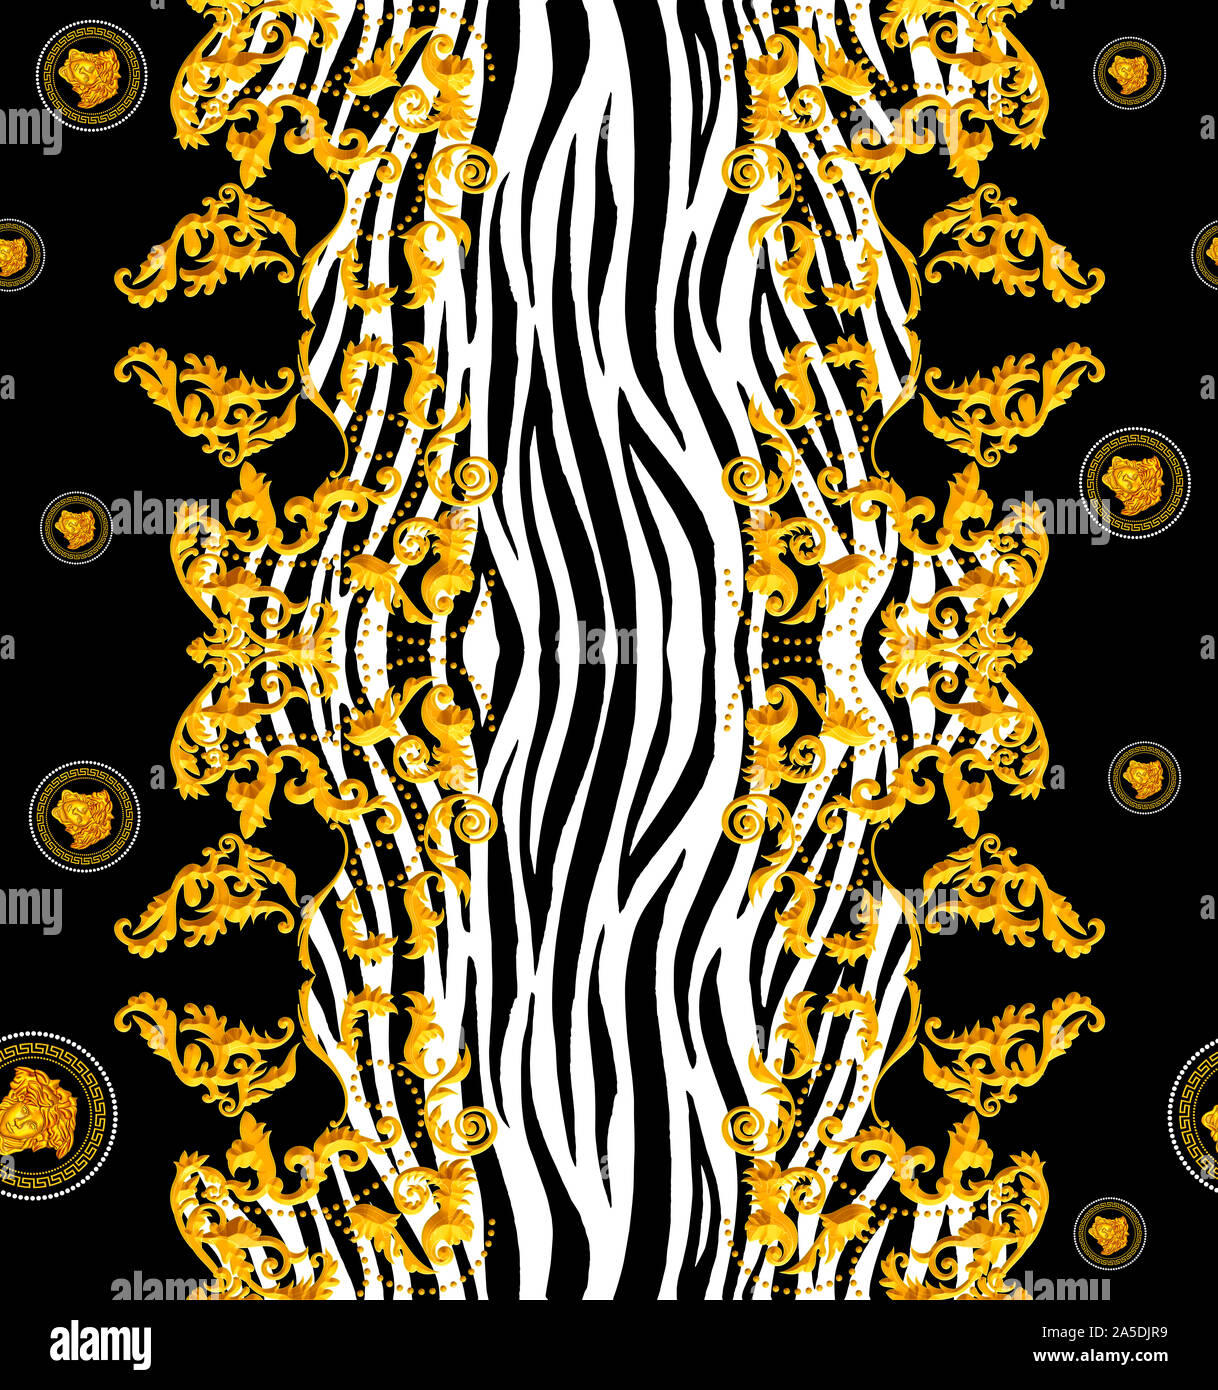 Seamless Golden Baroque Pattern with Zebra for Fabric. Trendy Repeating ...